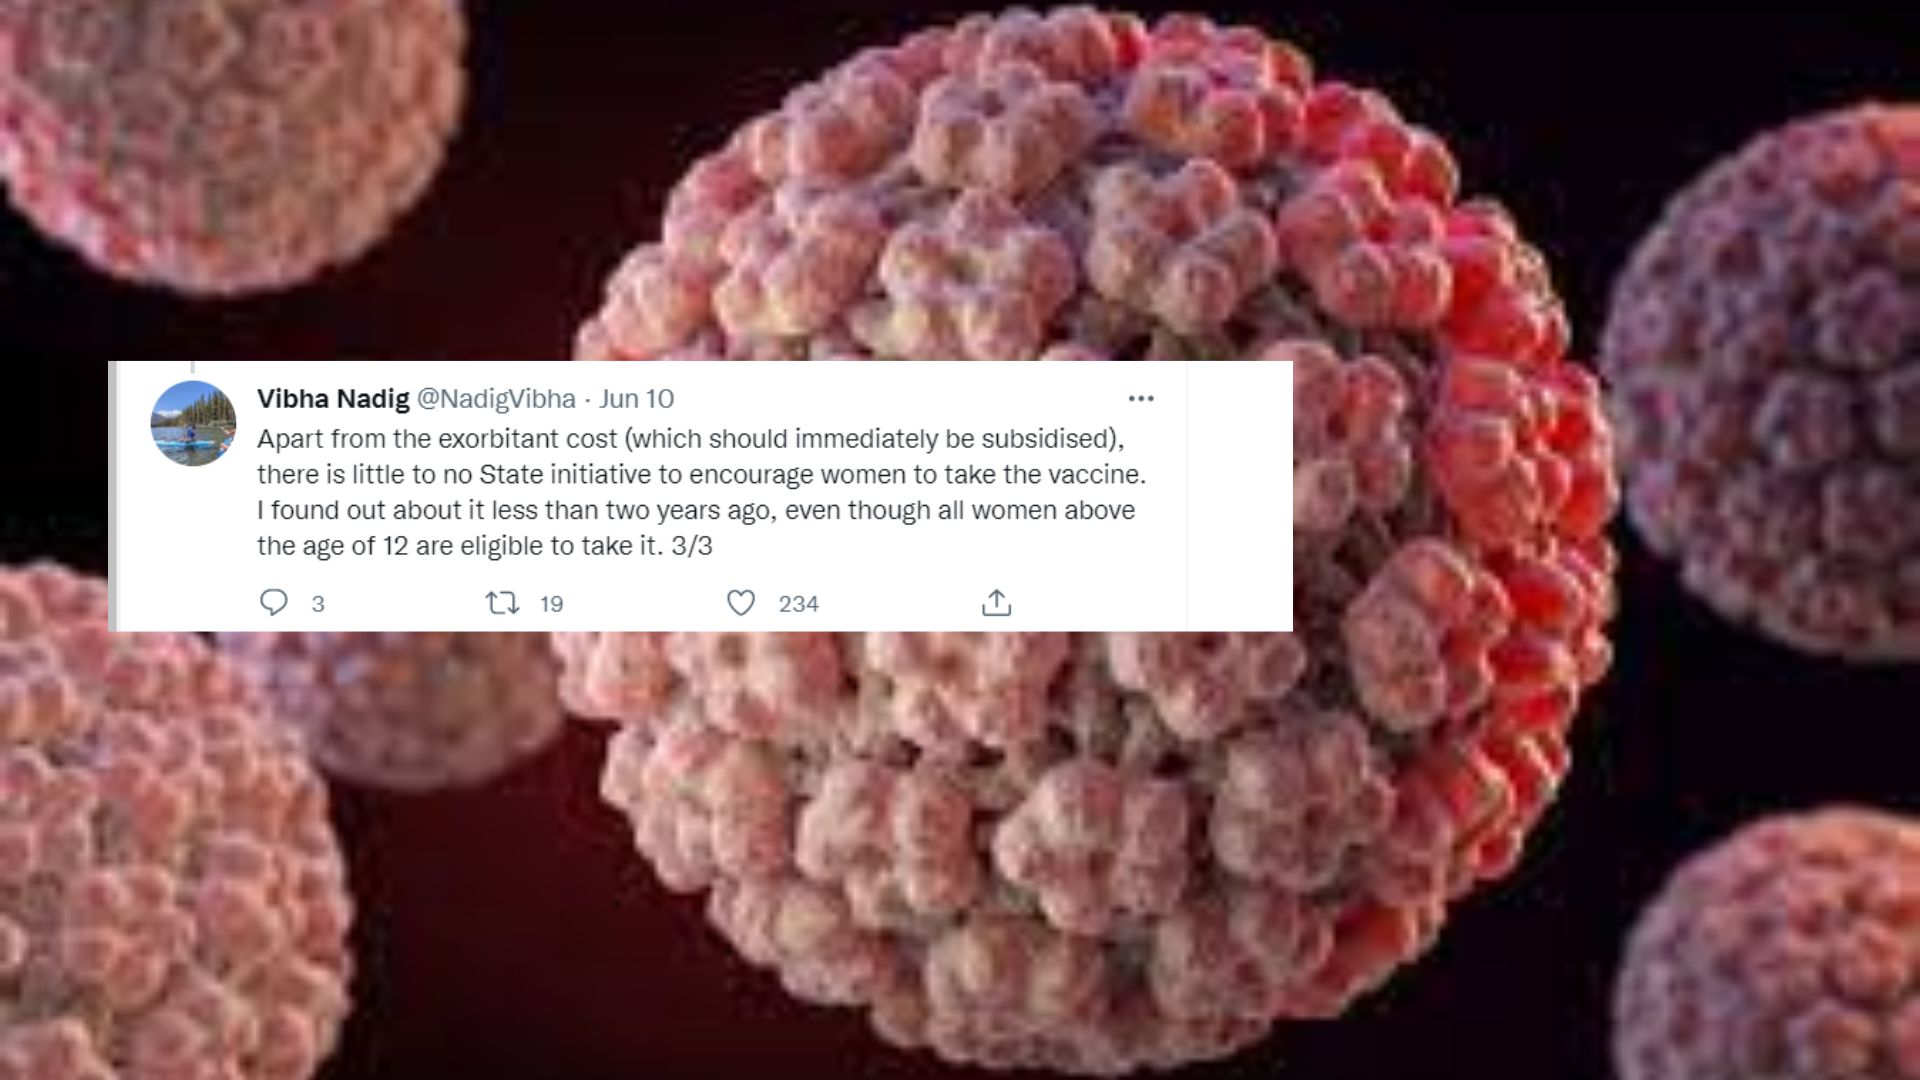 A Twitter User Highlights The Expensive Cost Of HPV Vaccines, Demands Subsidy Rates And More Awareness On The Topic From Government